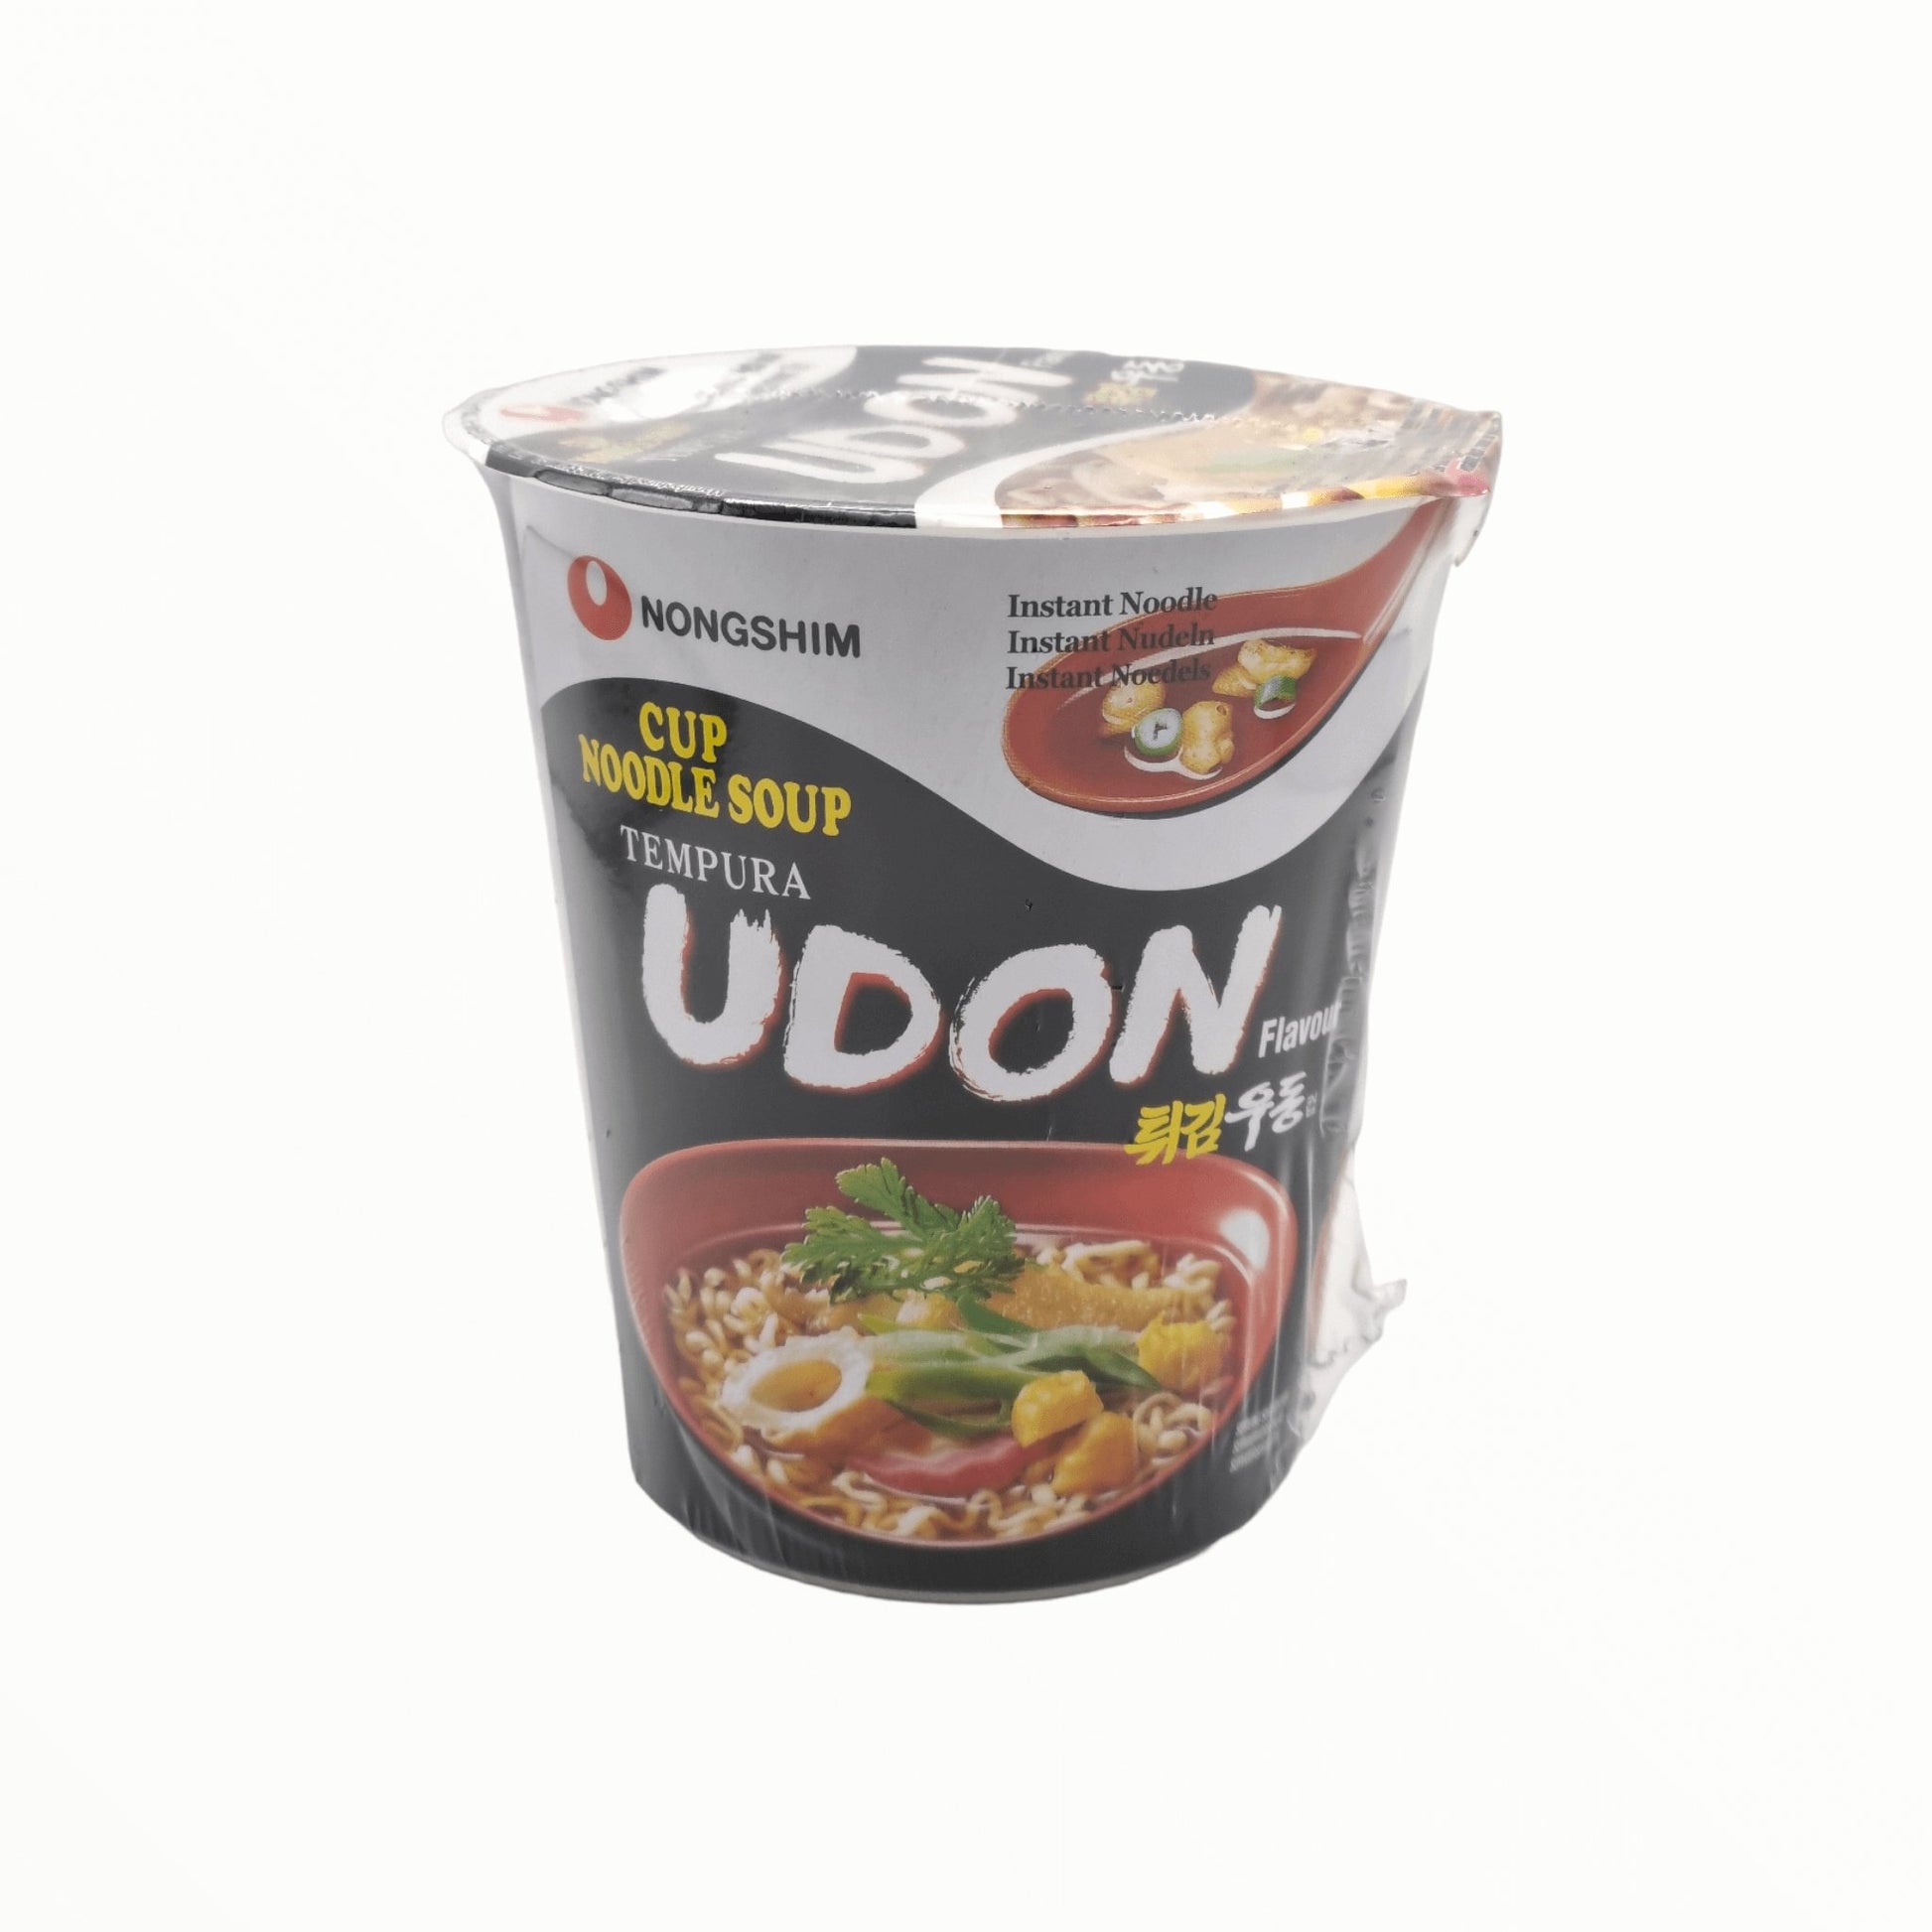 Cup Nudelsuppe Udon 62g - Mabuhay Pinoy Asia Shop